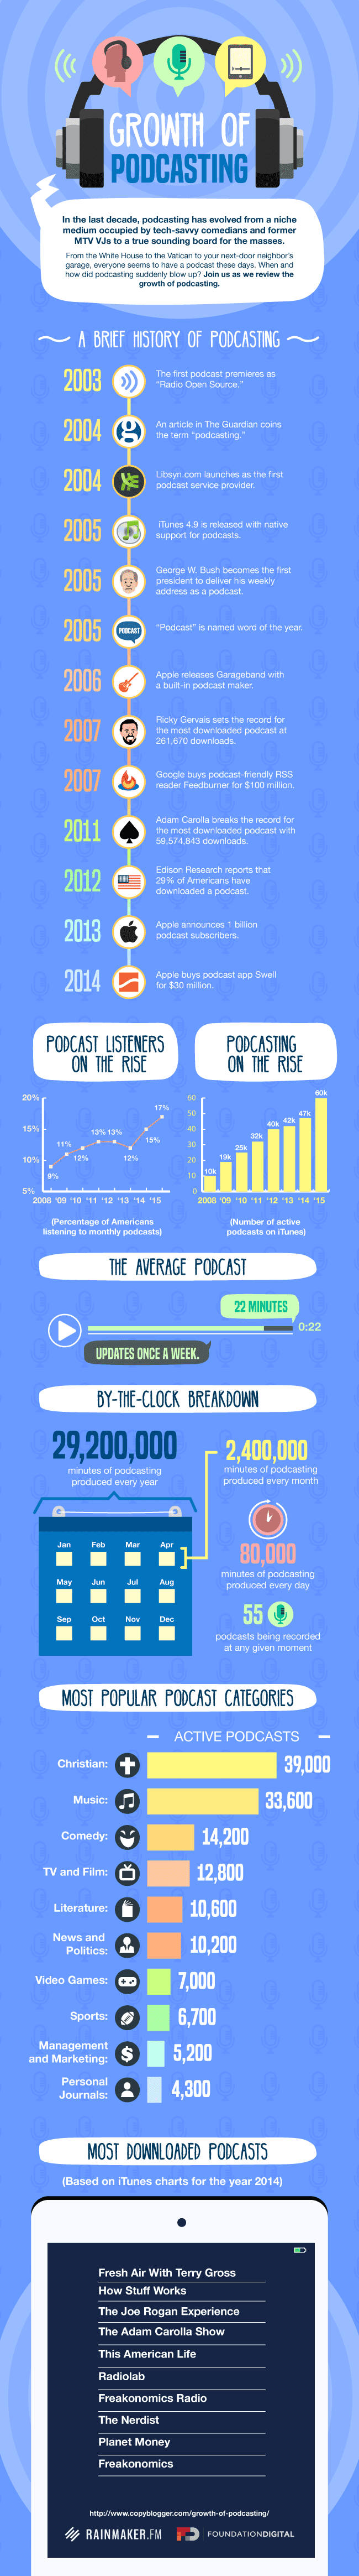 copyblogger-growth-of-podcasting-infographic